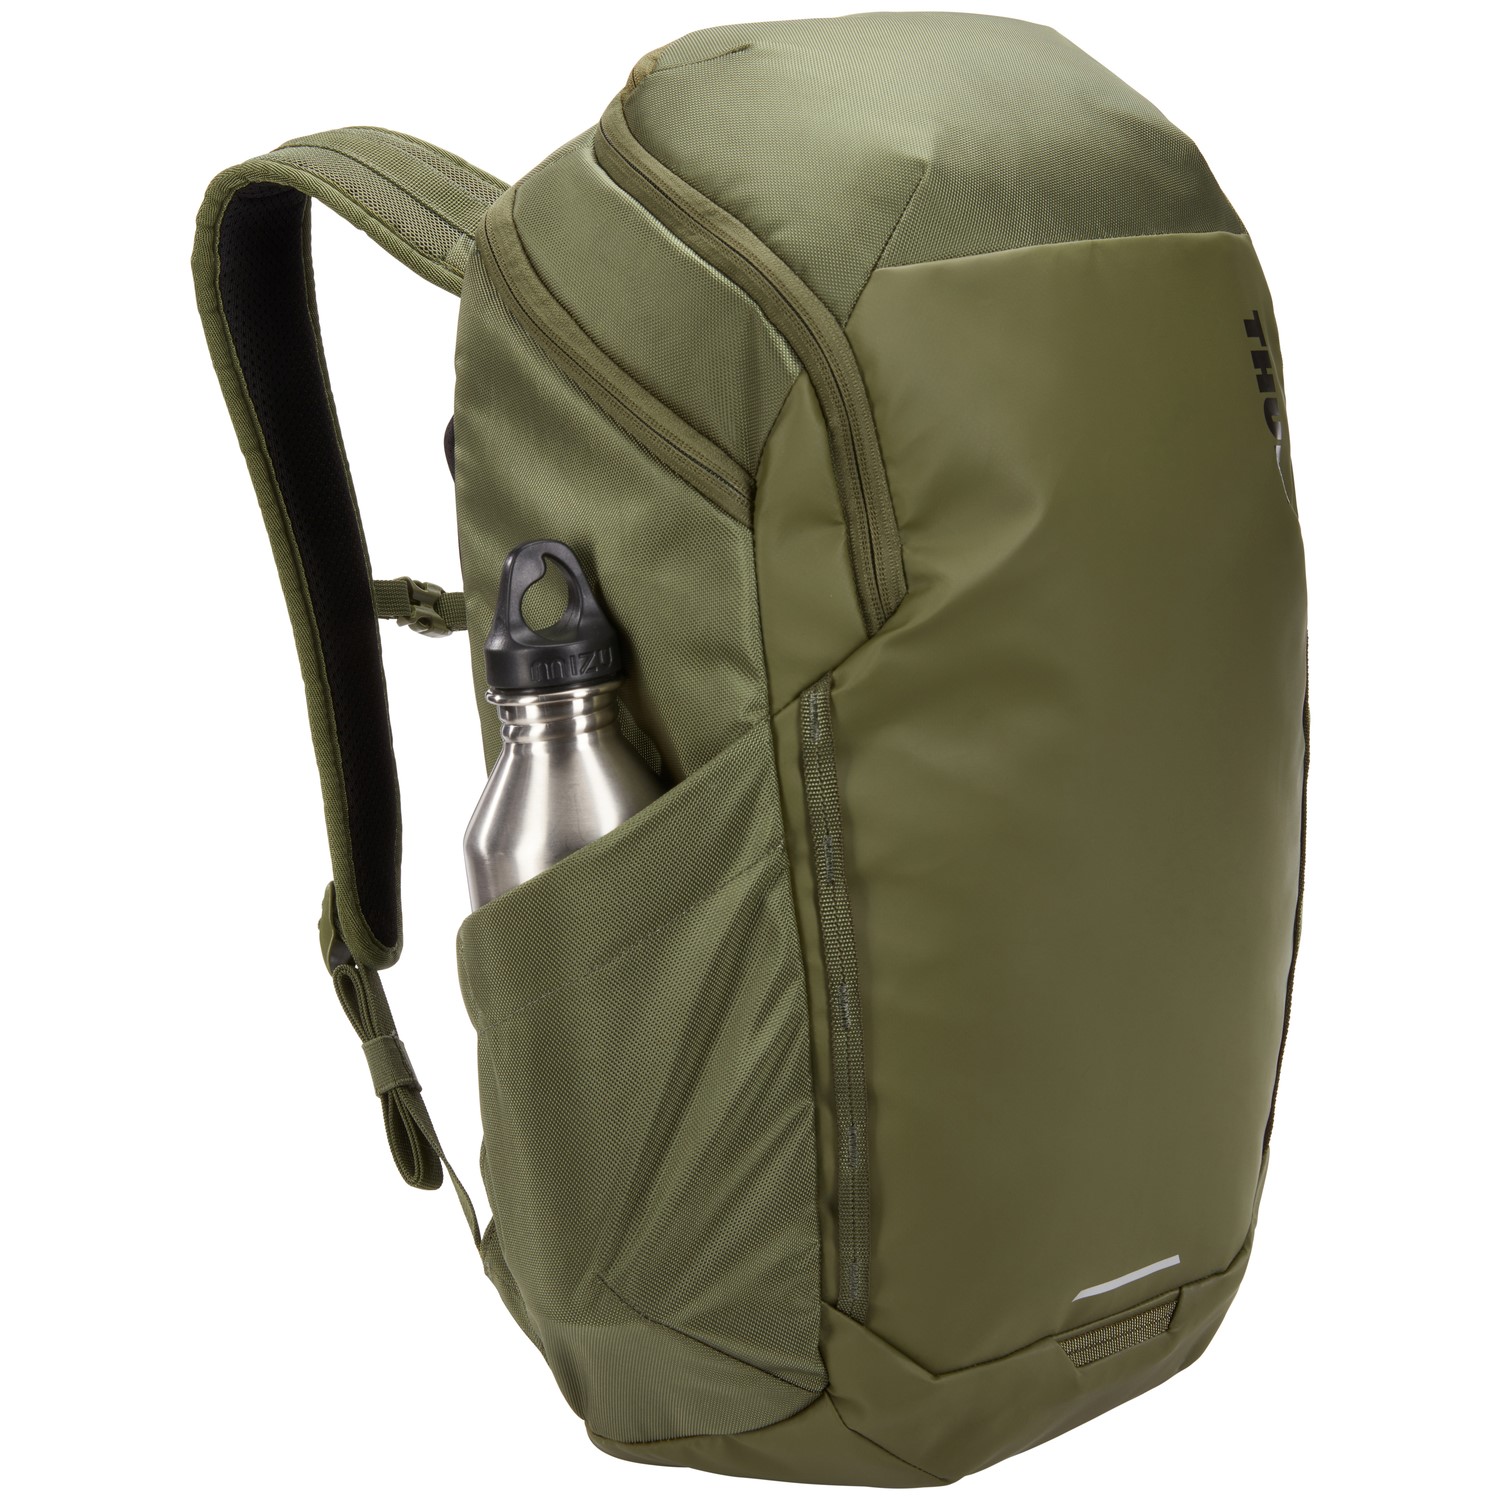 Stash a water bottle or other essentials in the expandable side pocket